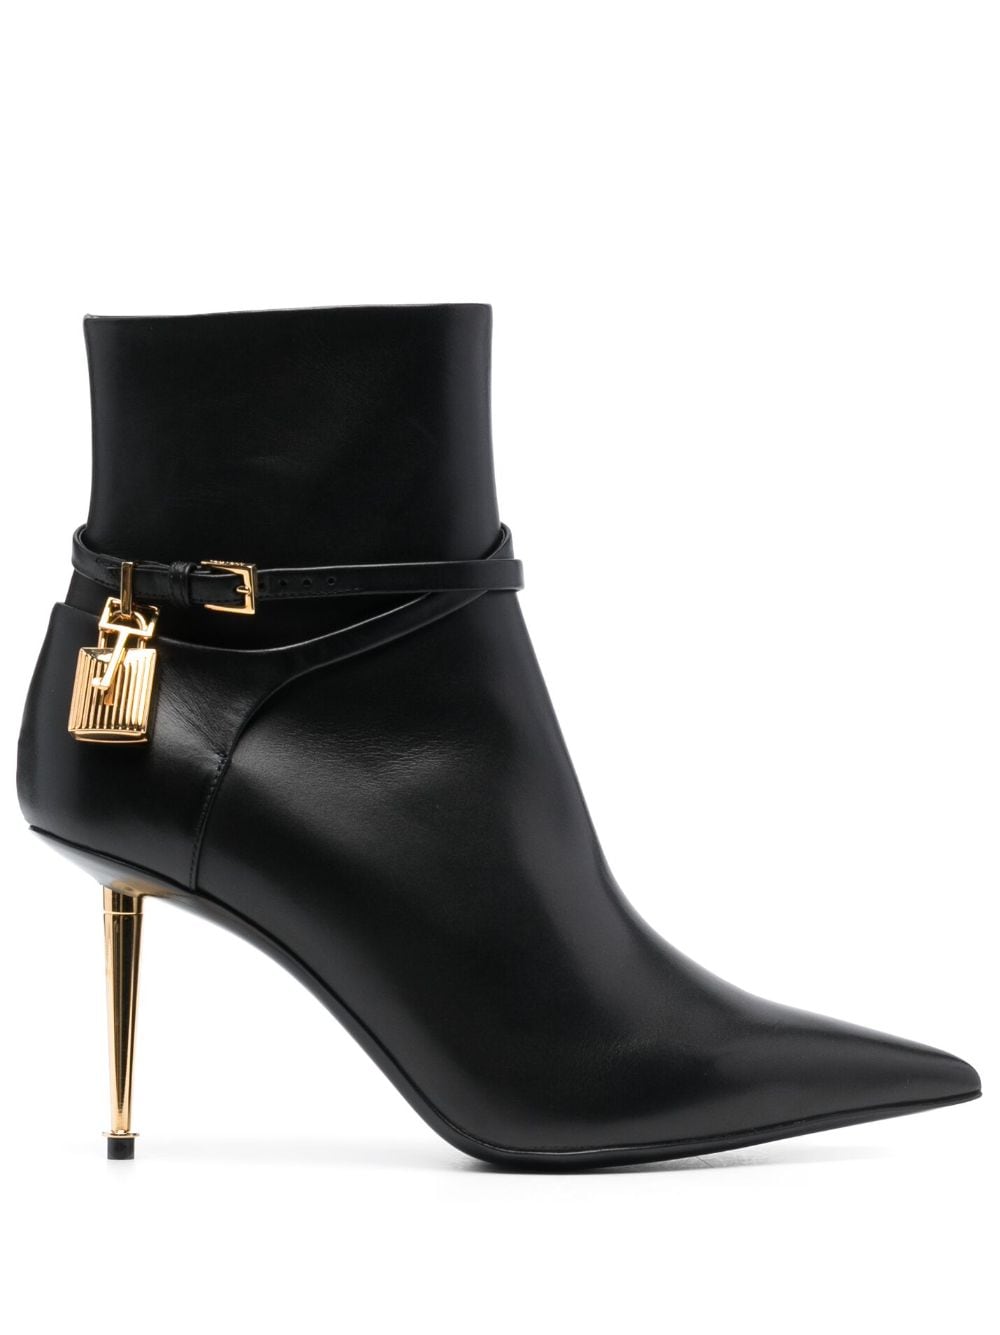 TOM FORD 80mm leather pointed-toe boots - Black von TOM FORD